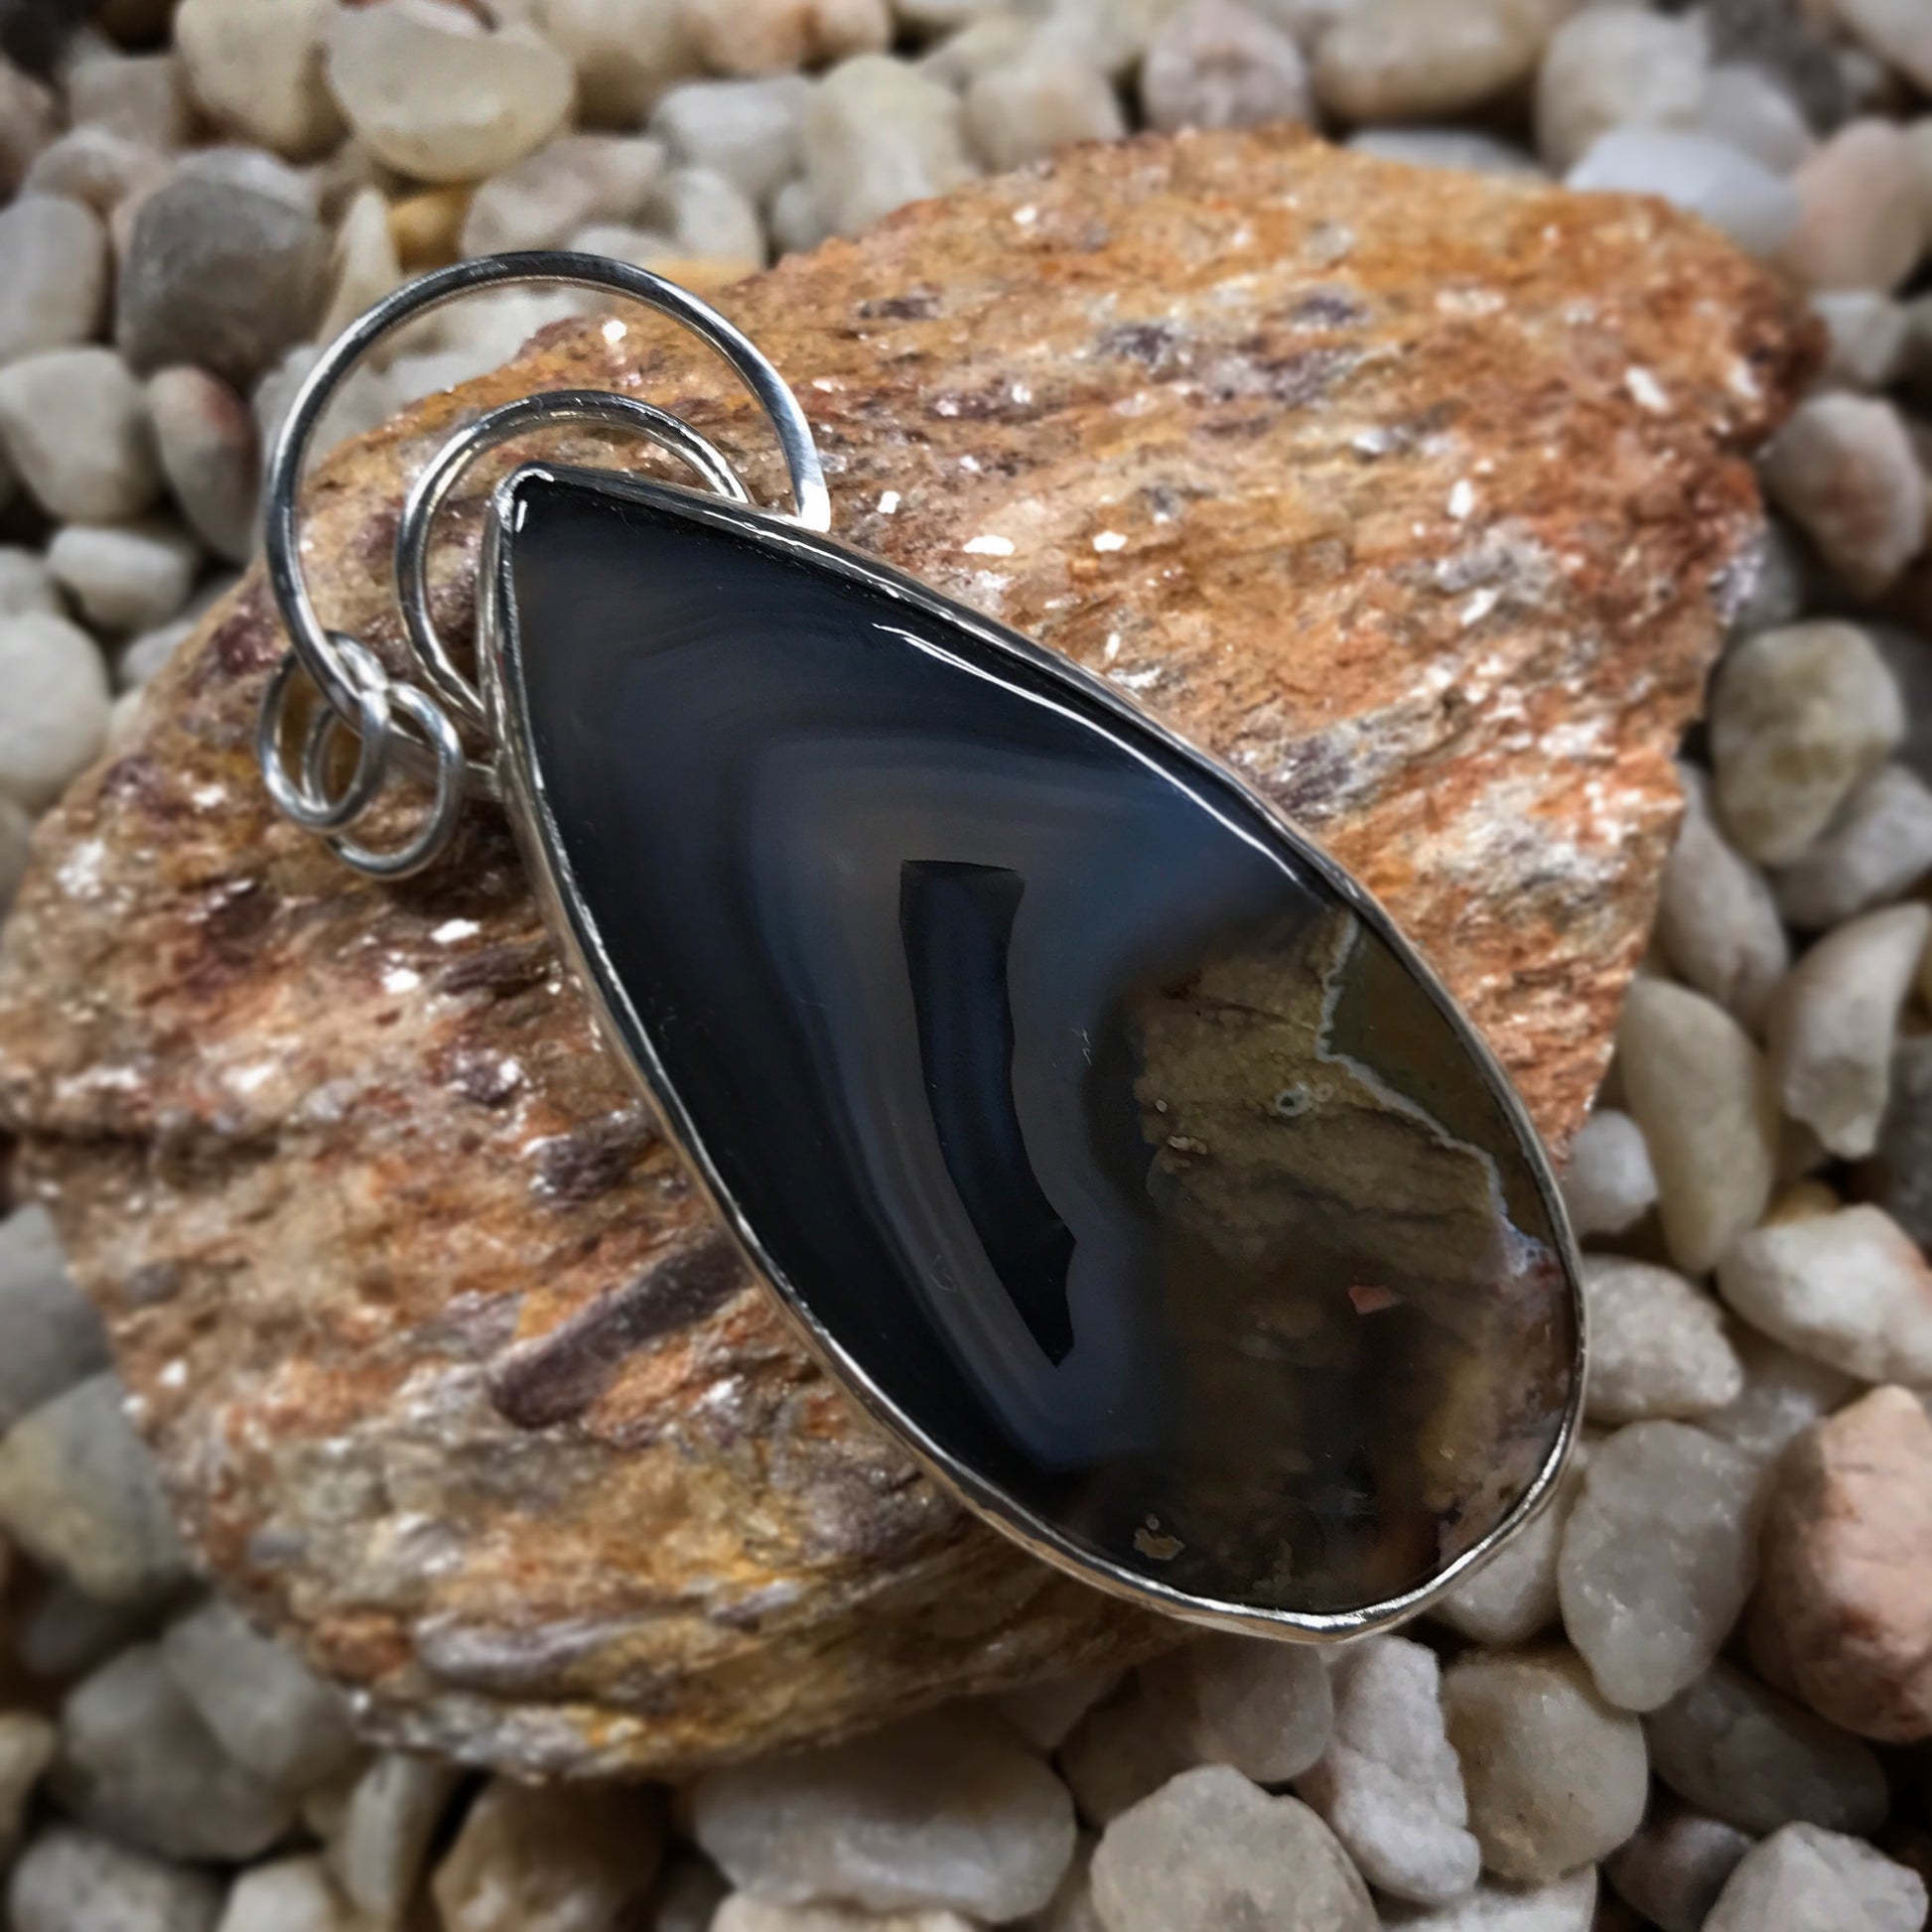 EMBER PENDANT   This handmade pendant is made of a Thunder Egg Cabochon set in Argentium sterling silver.